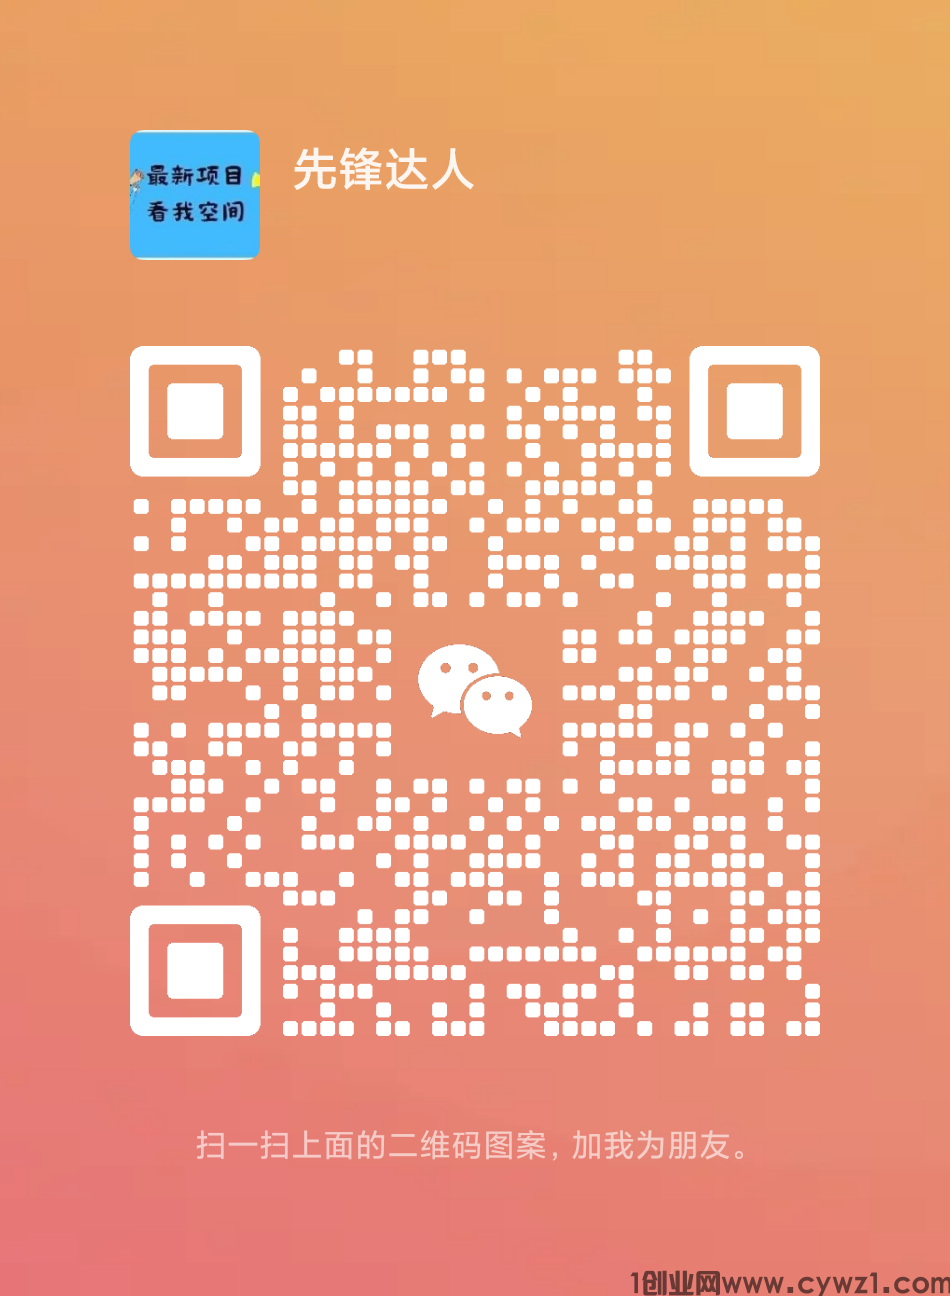 mmqrcode1714976245554.png